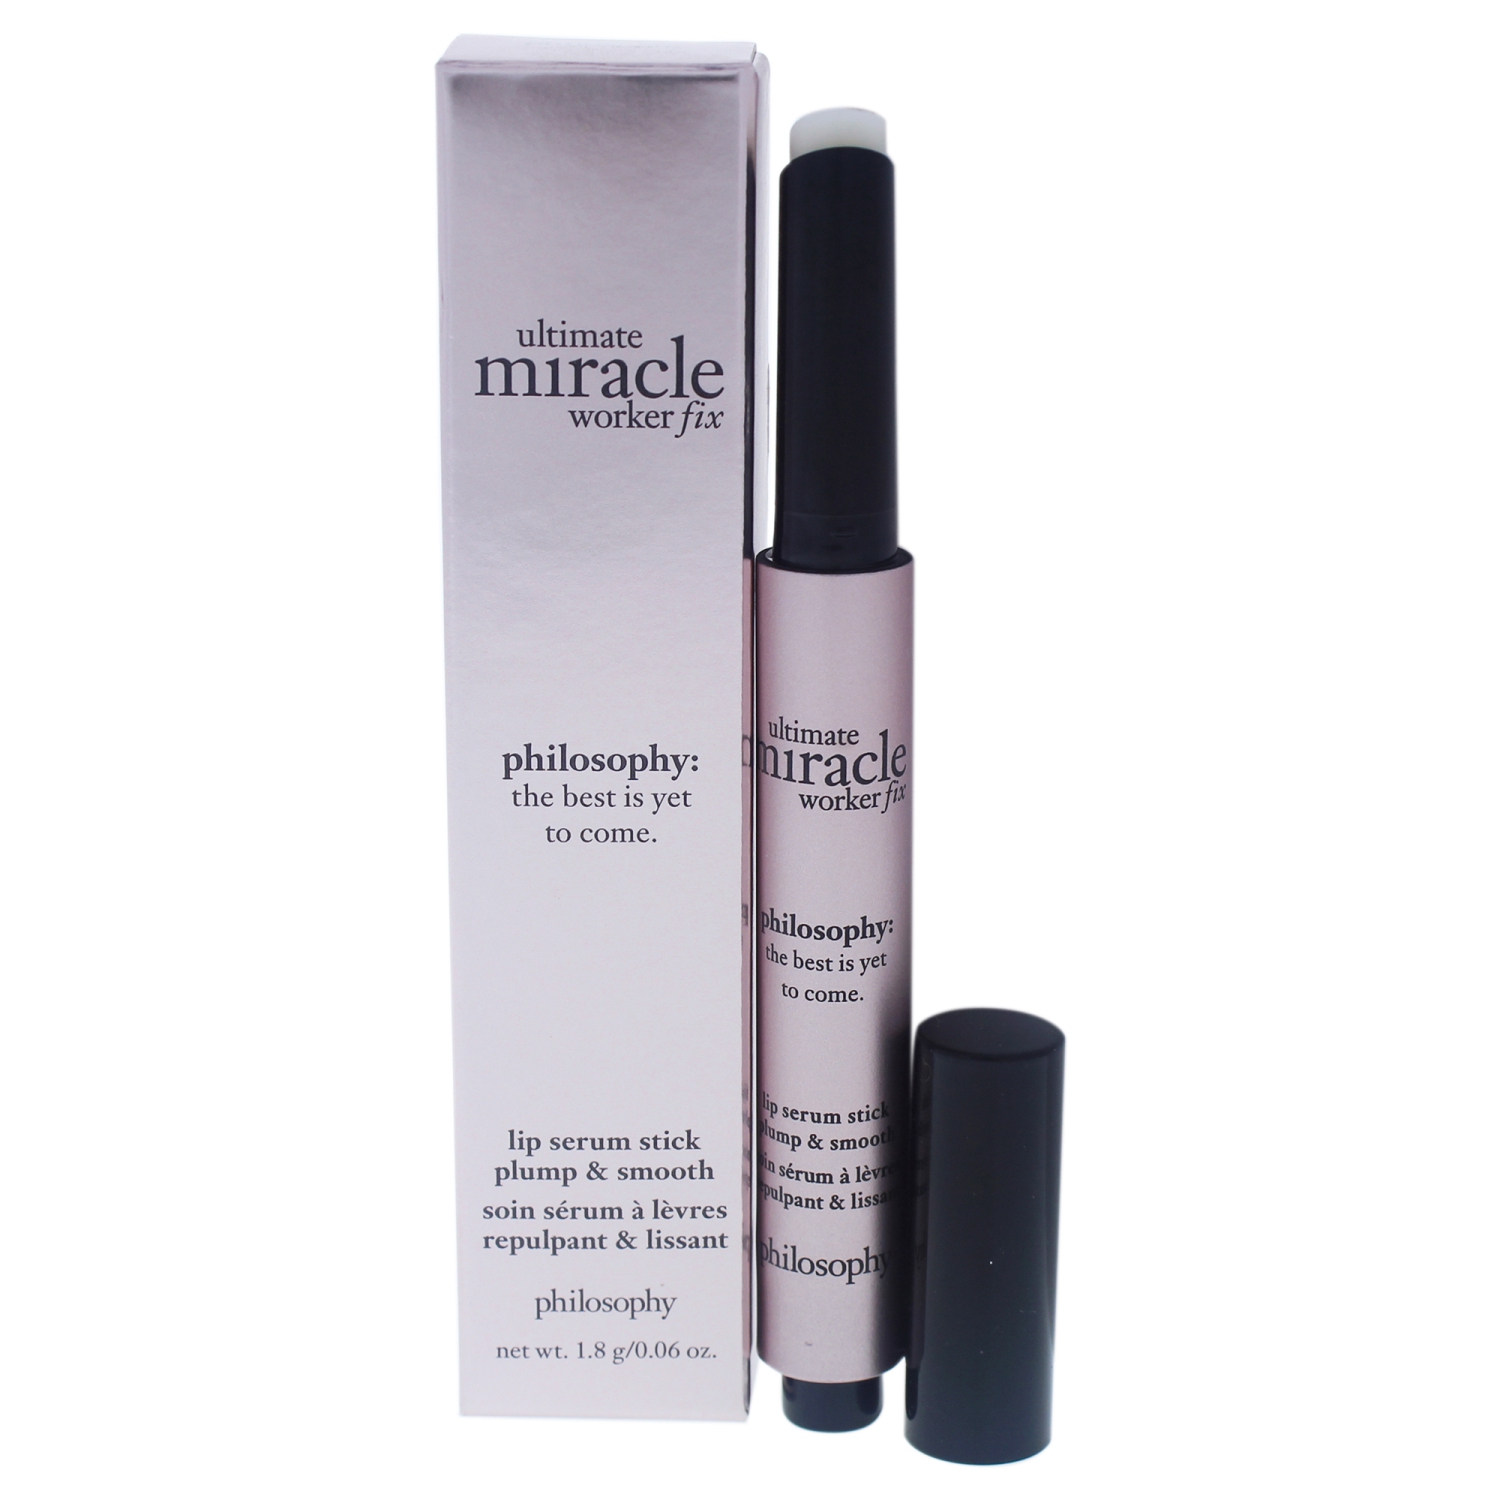 Ultimate Miracle Worker Fix Lip Serum Stick by Philosophy for Women - 0.06 oz Lip Treatment